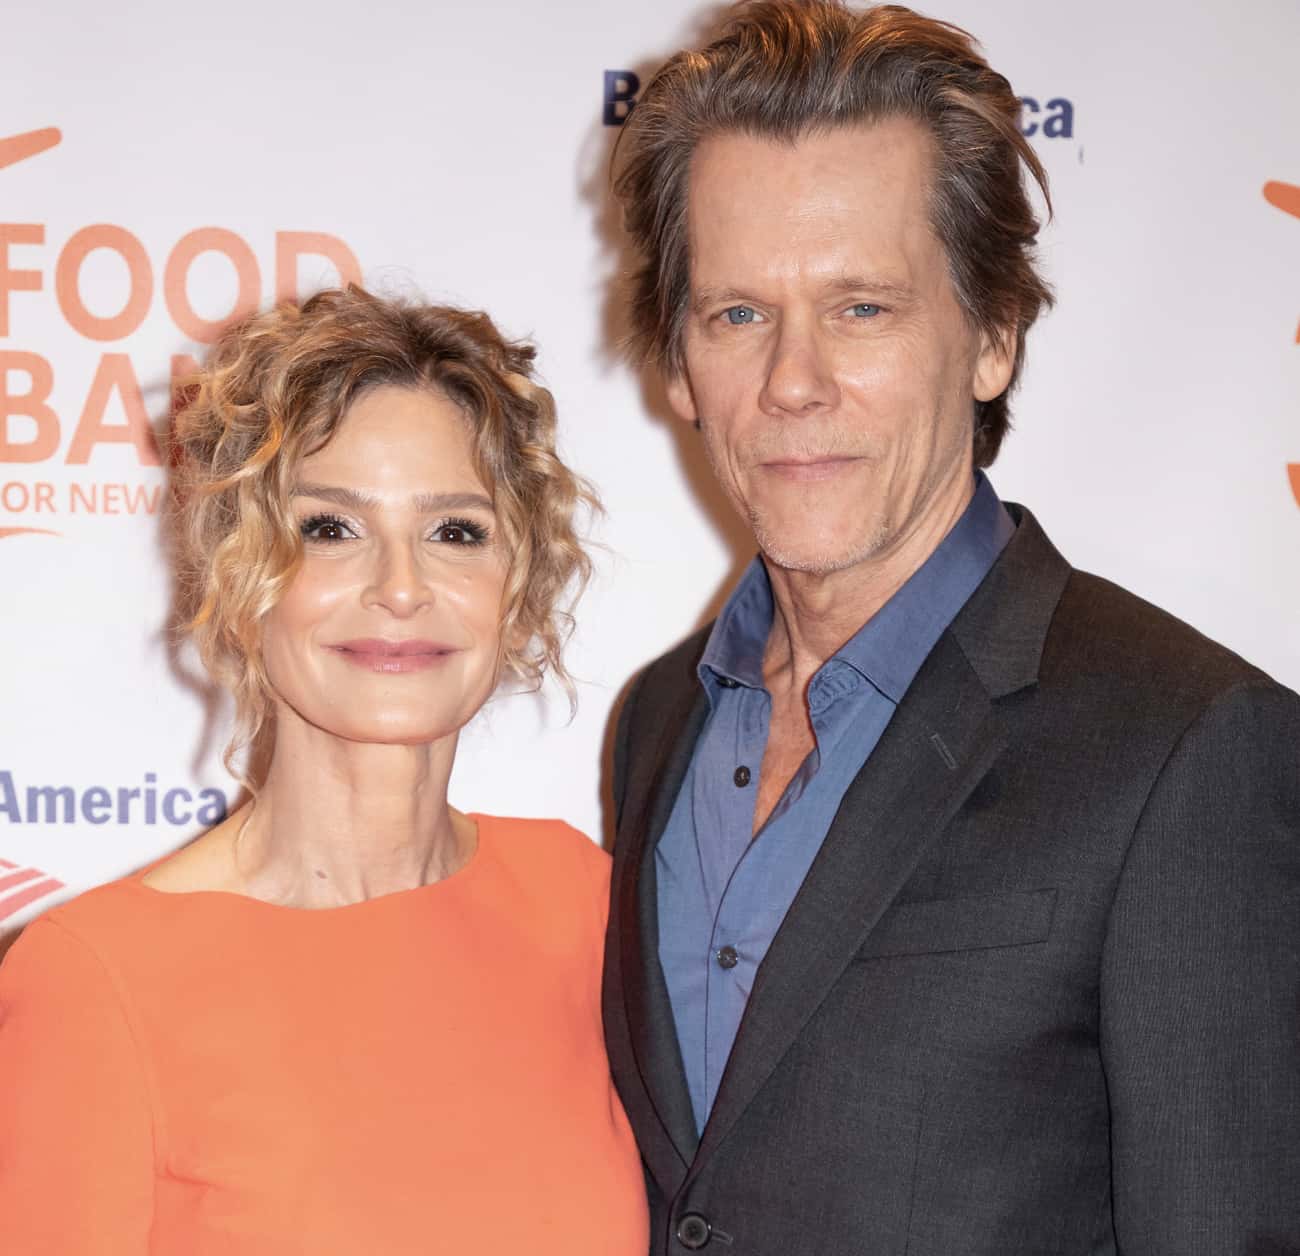 Kyra Sedgwick And Kevin Bacon Explained Why They Won't Be Invited To Another Tom Cruise Party